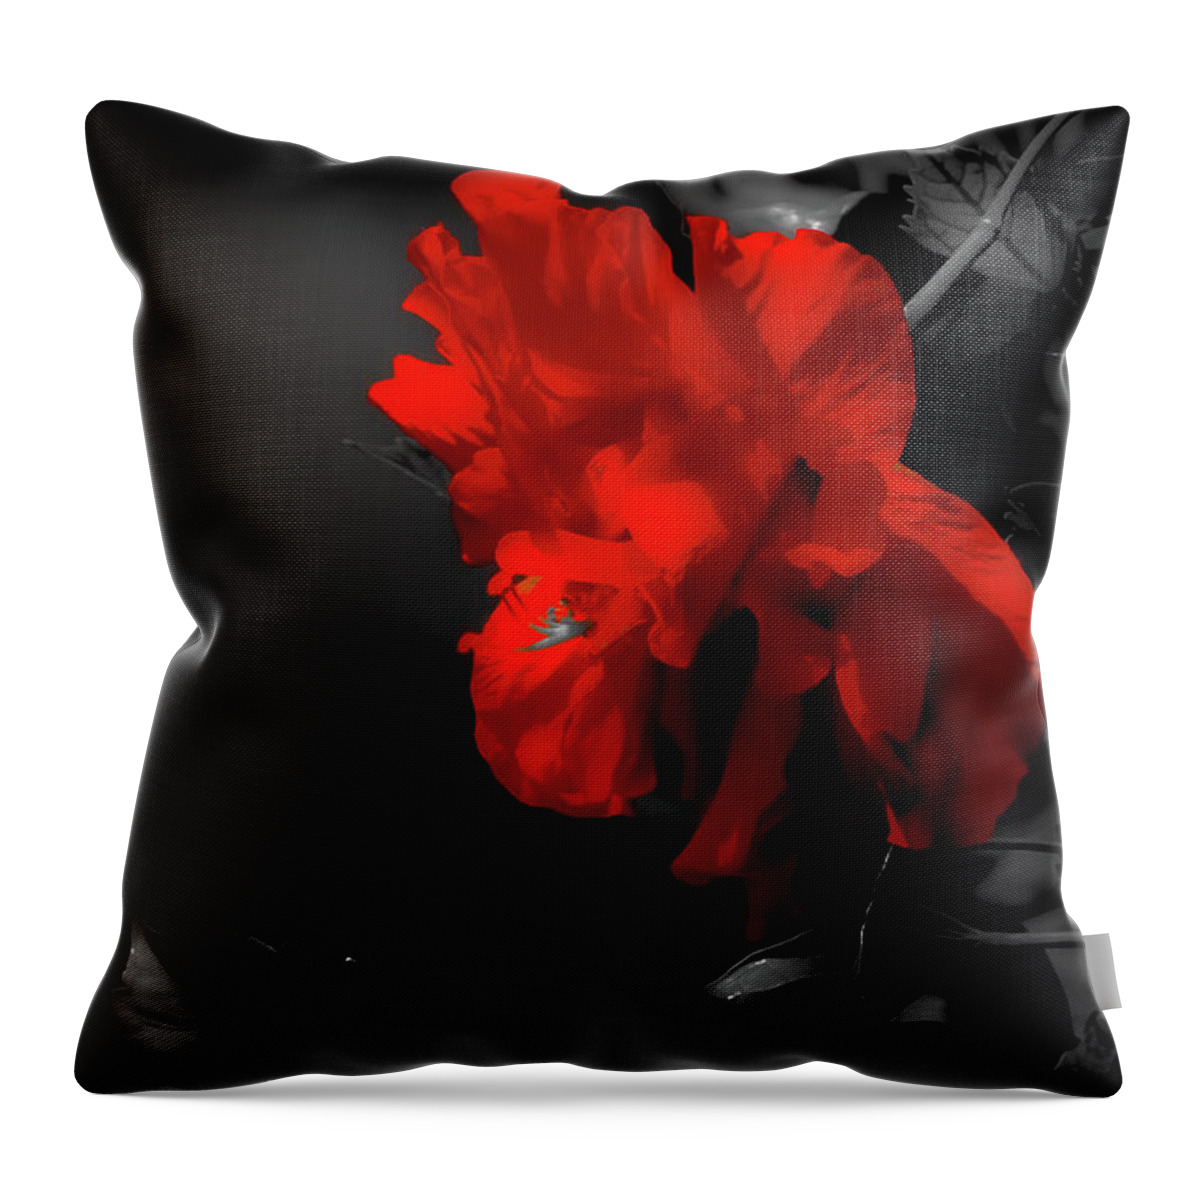 Hibiscus Throw Pillow featuring the photograph Red Surrounded by Black by DigiArt Diaries by Vicky B Fuller